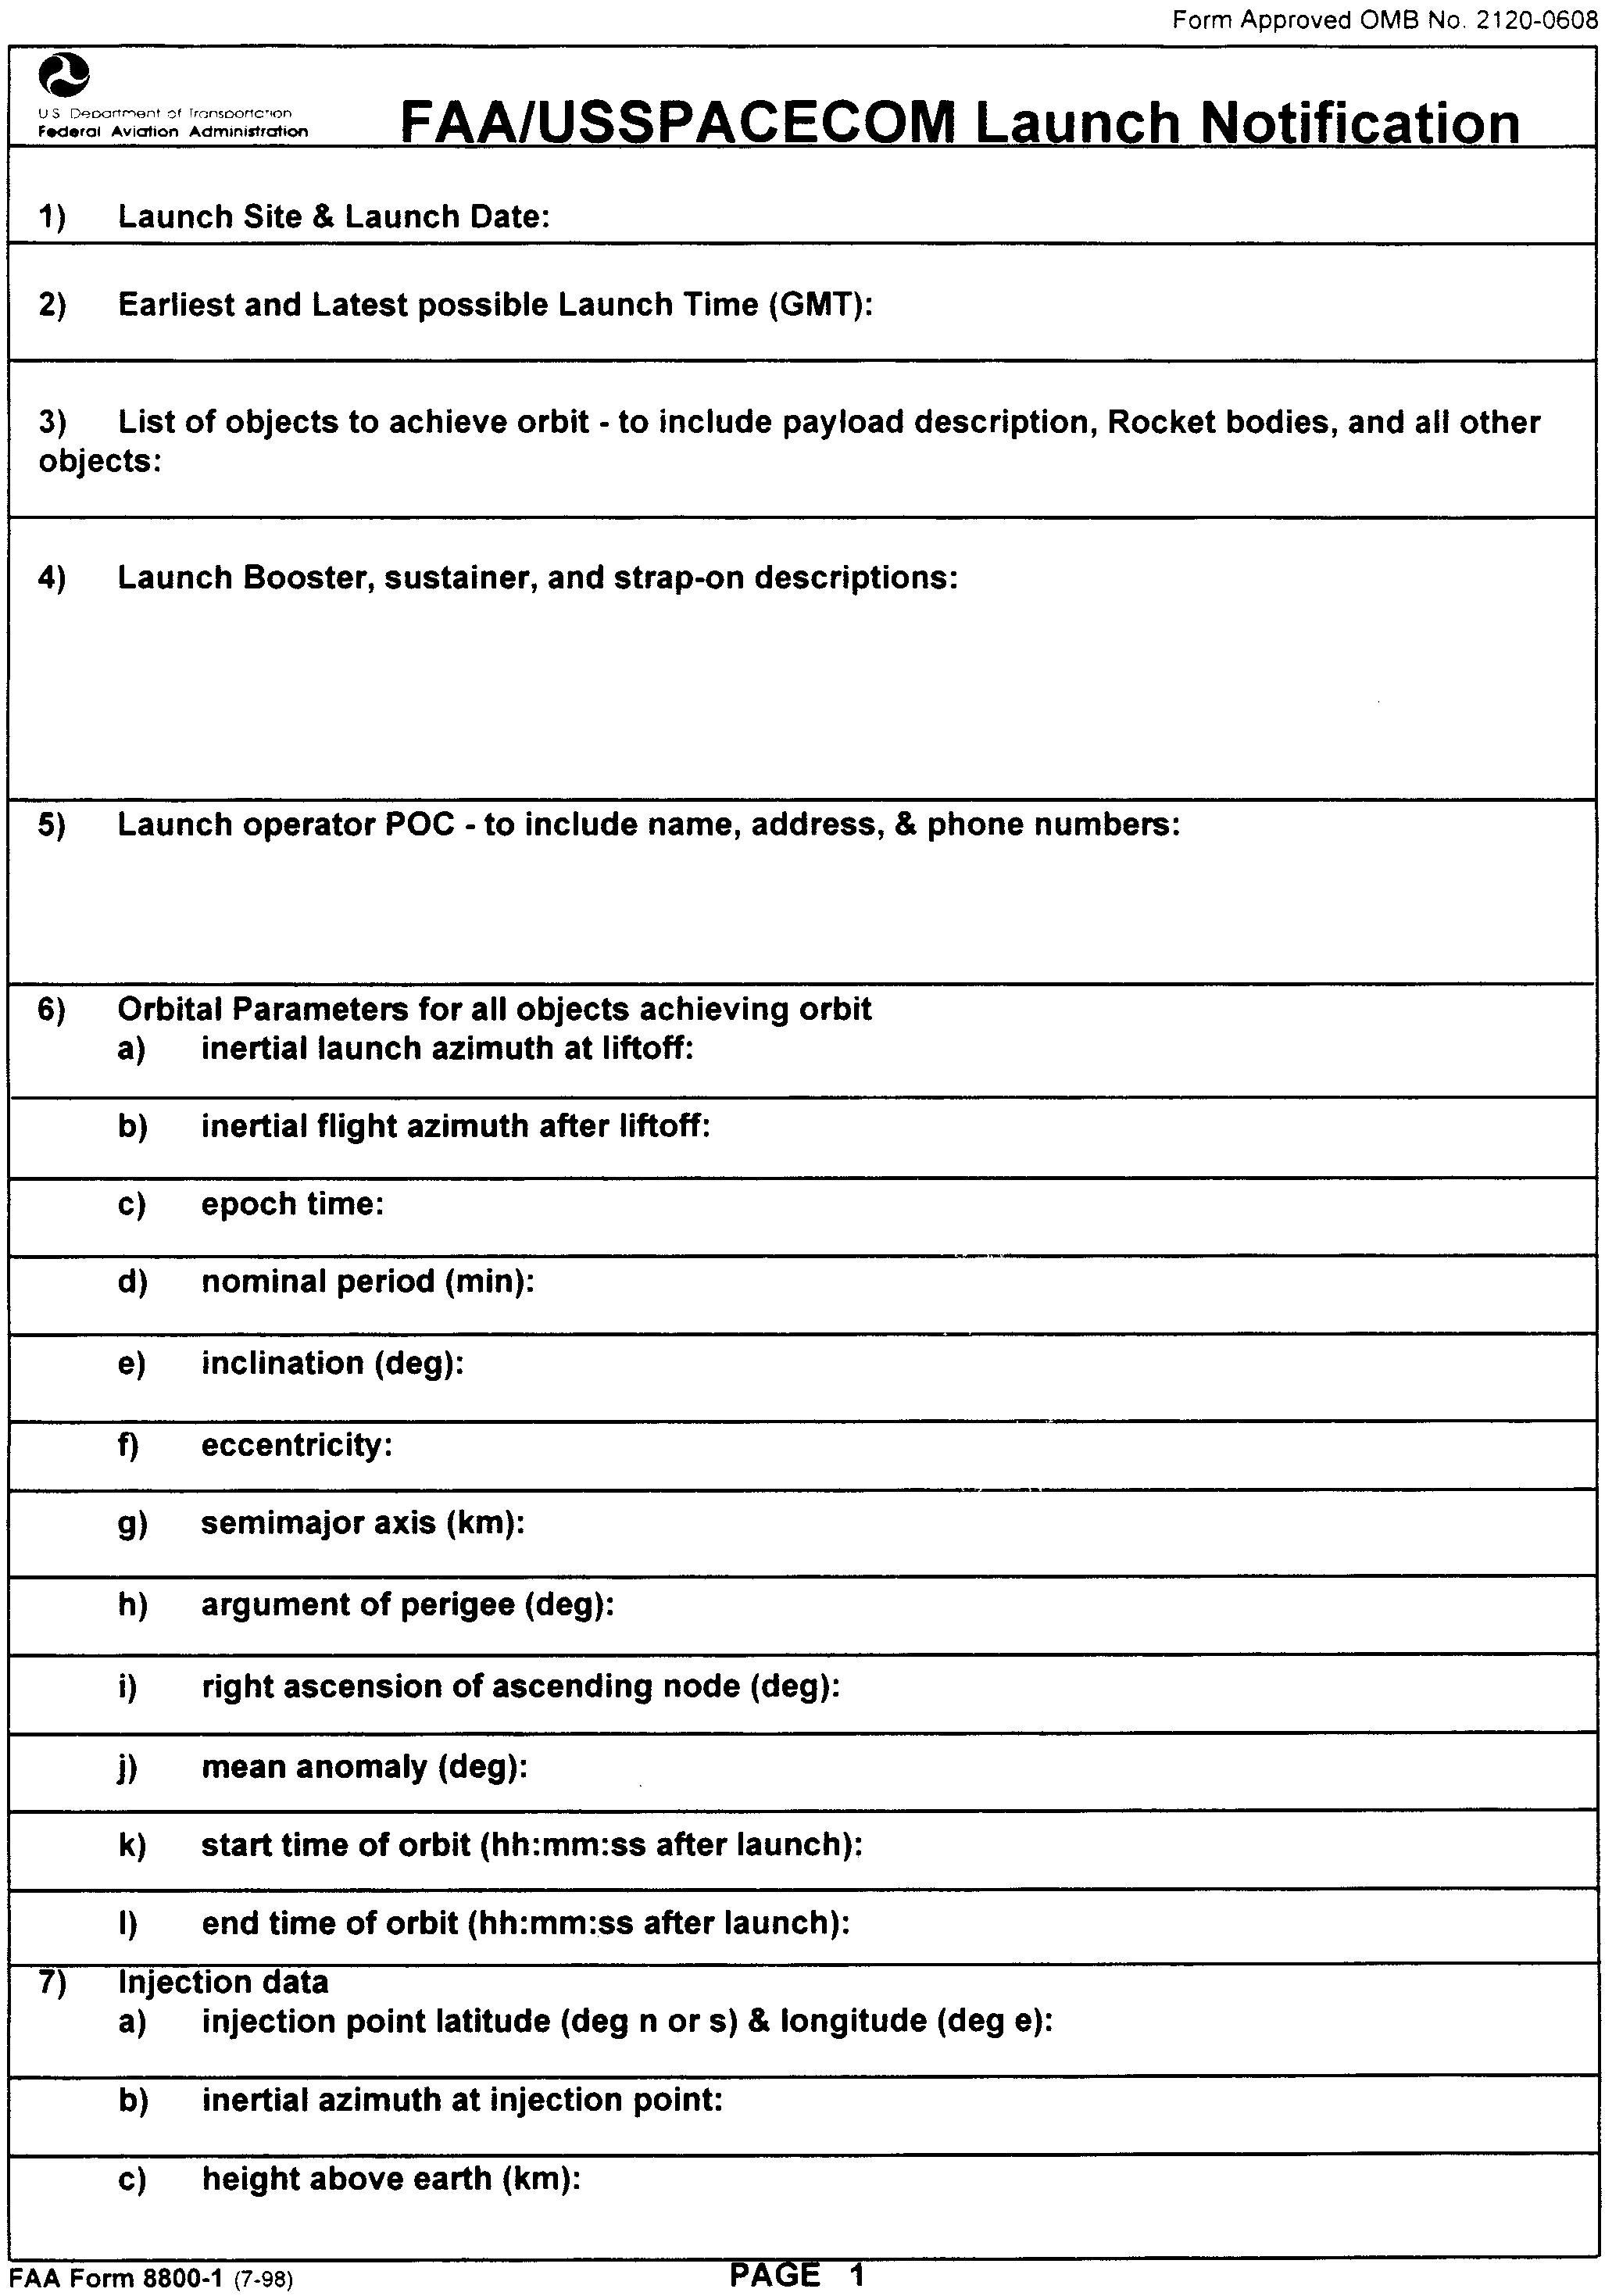 Graphic of Appendix A to Part 415—FAA/USSPACECOM Launch Notification Form